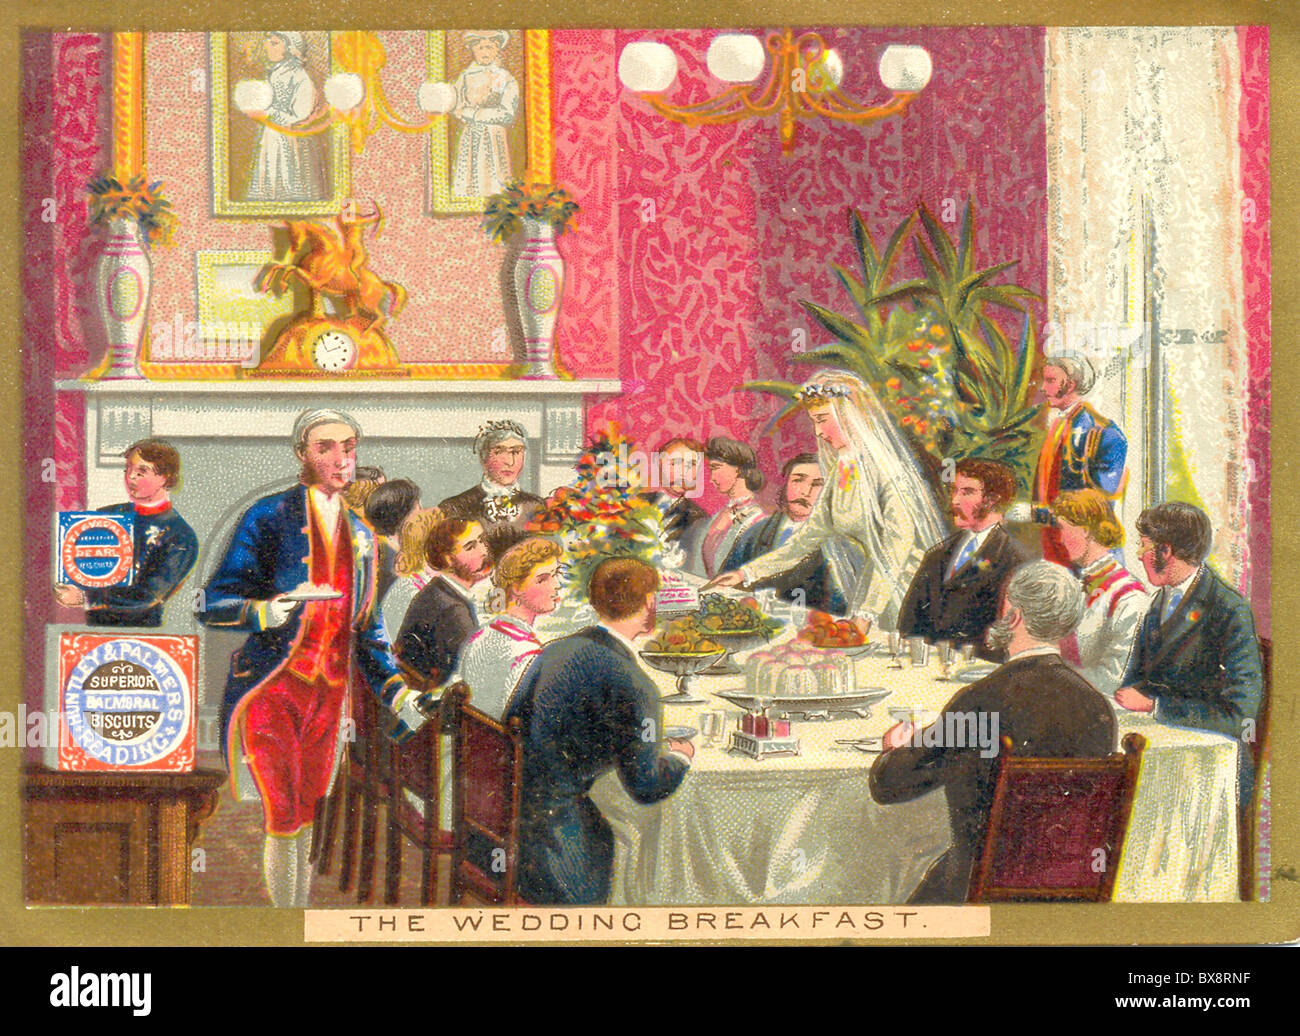 The Wedding Breakfast an advertisement for Huntley & Palmers biscuits l879 Stock Photo